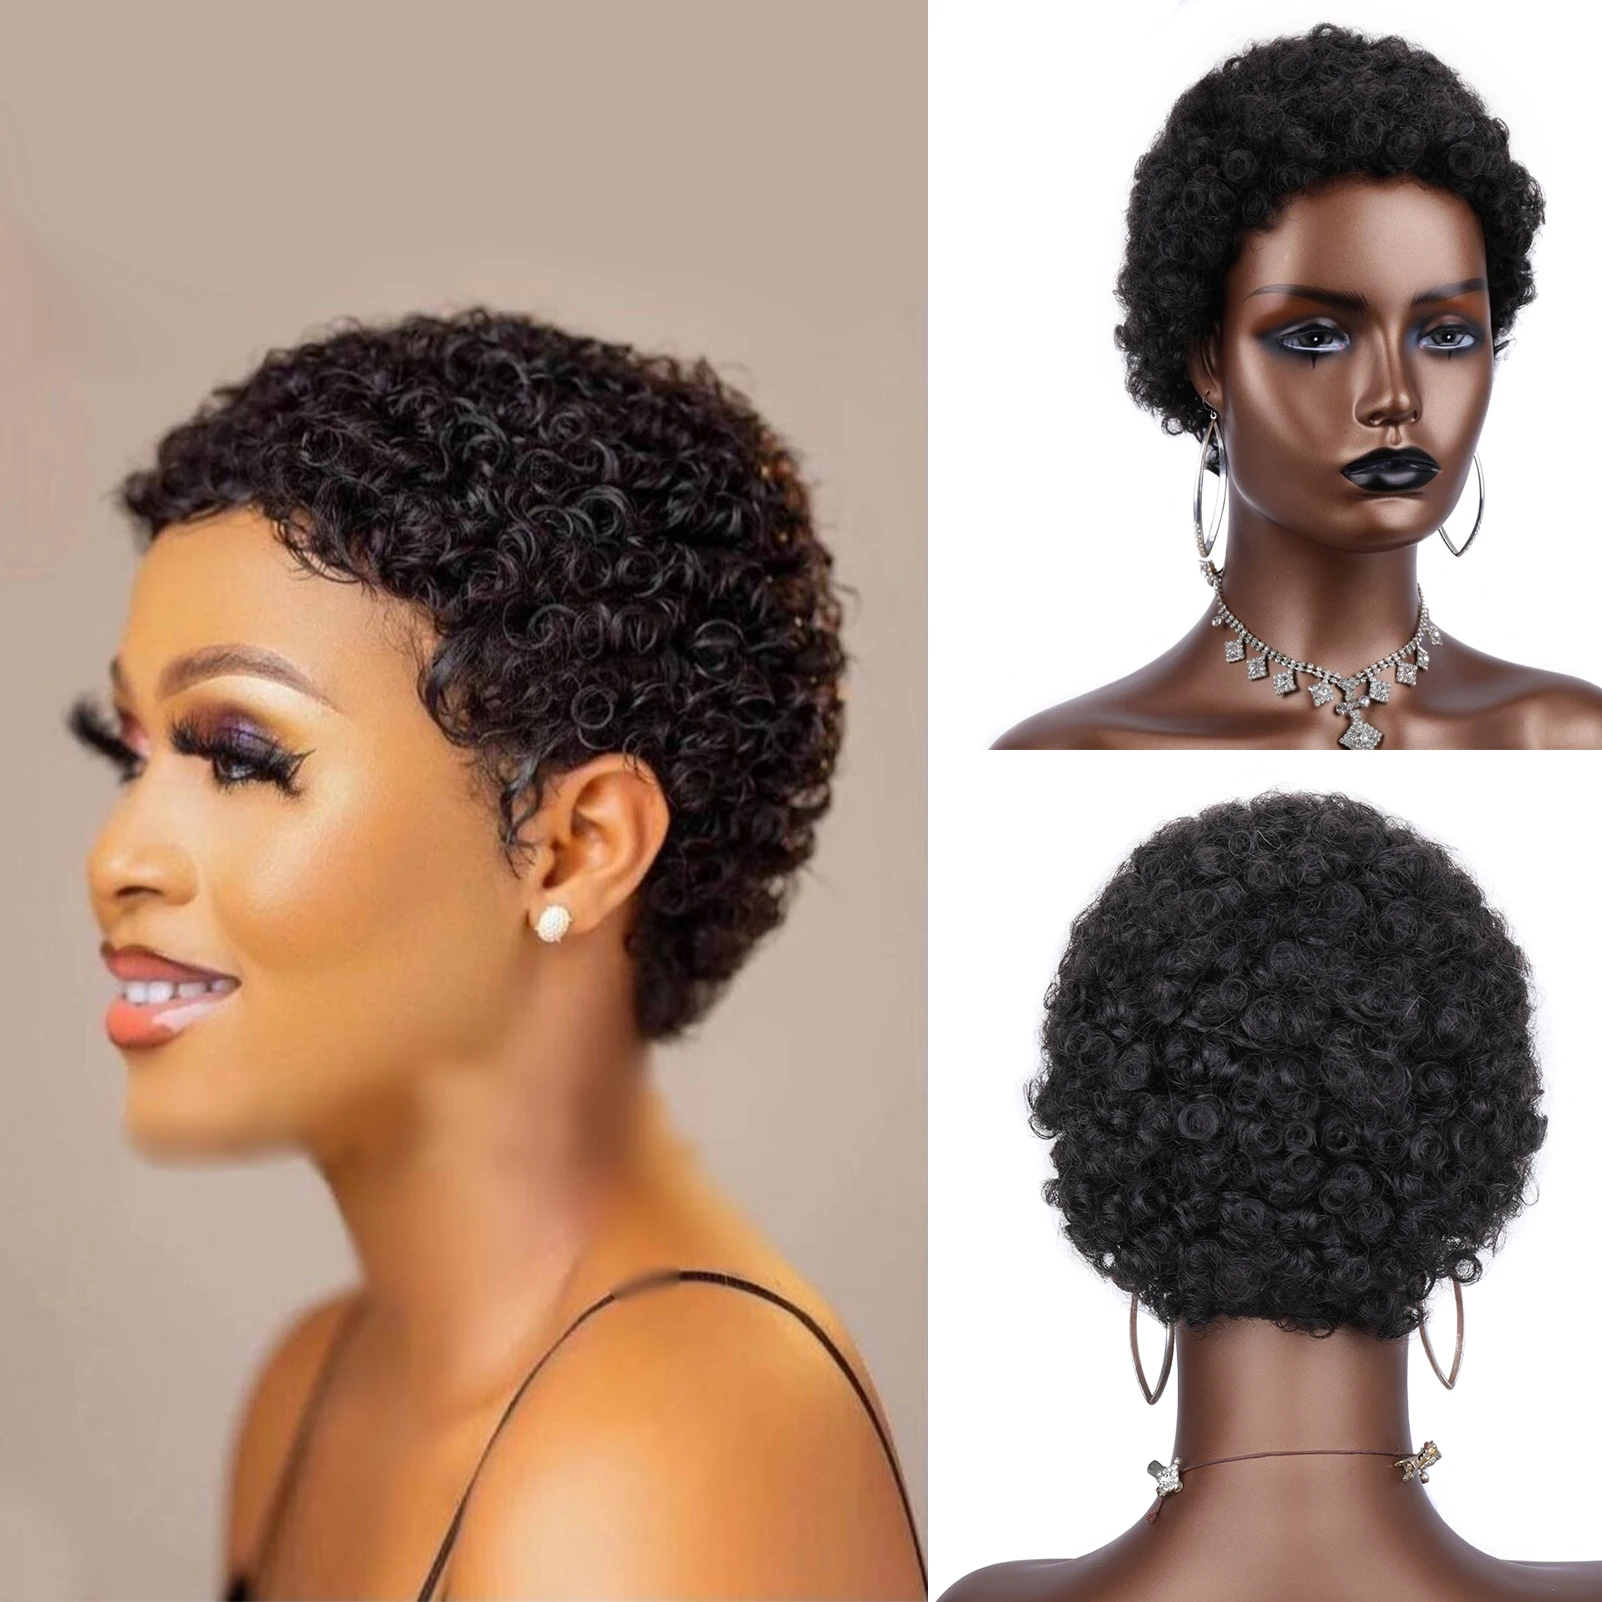 Super short afro curl pixie wig 100% human hair Brazil remy no lace wig boy - £27.97 GBP